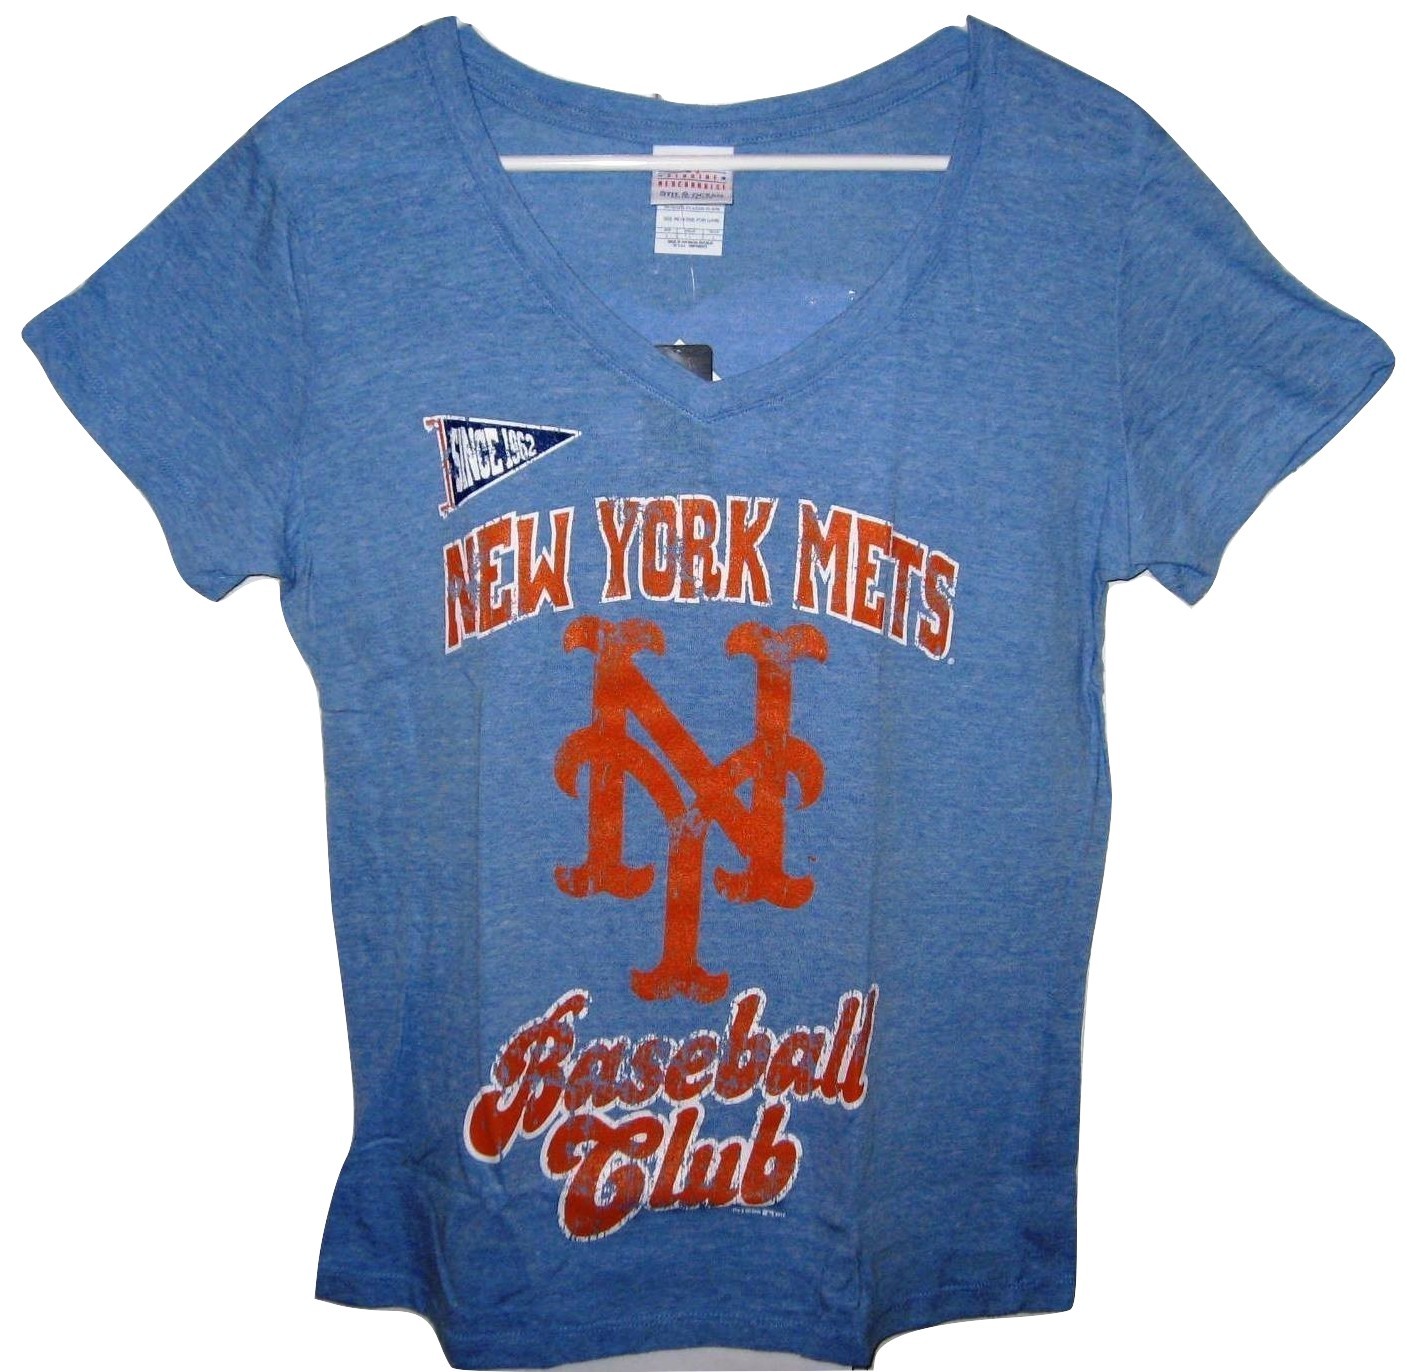 Primary image for MLB Woman's New York Mets Club Short Sleeve Tee L 